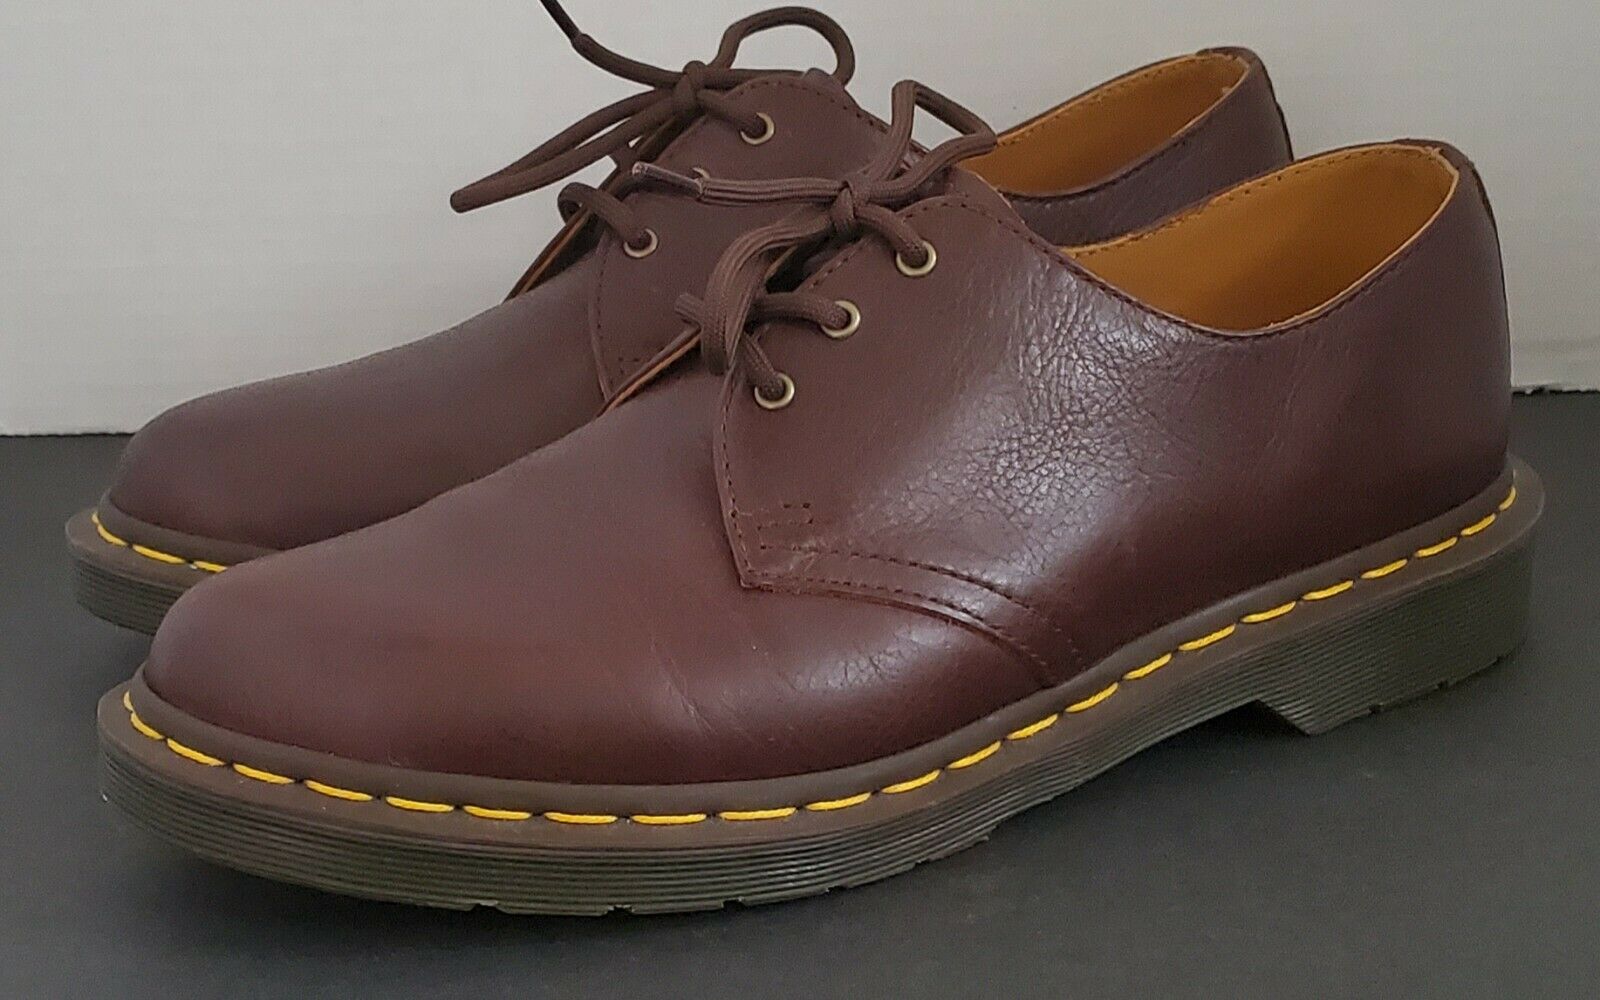 Doc Martens AW004 Brown Leather Lace Up Mens Dress Casual Oxford Shoes Size 10 M